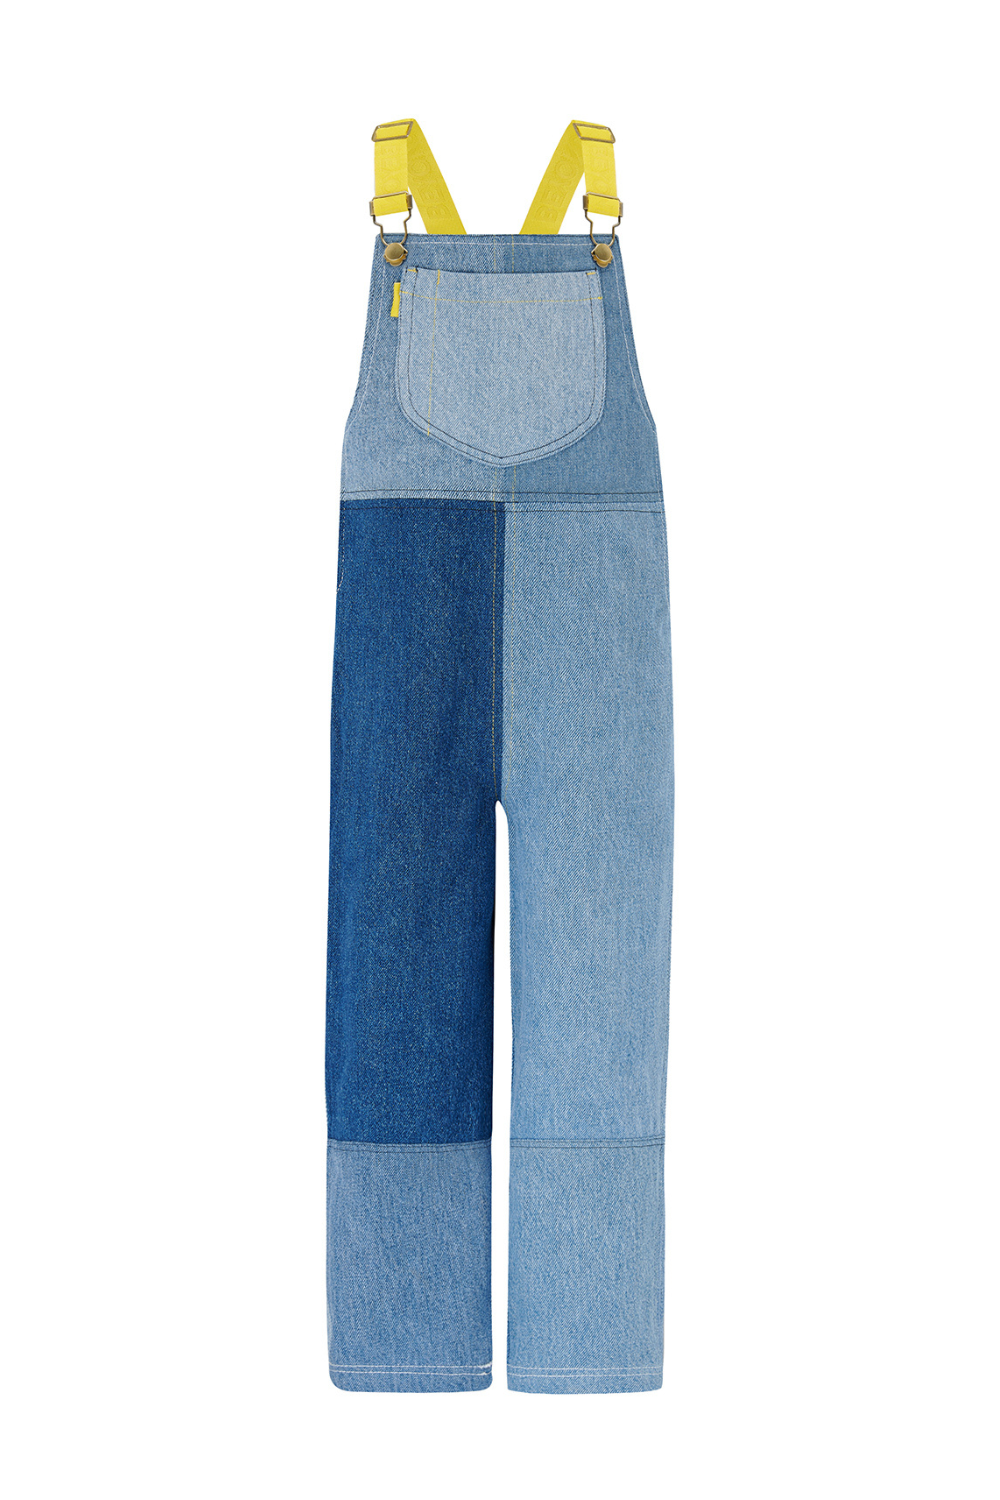 The Junior Ovve Dungarees